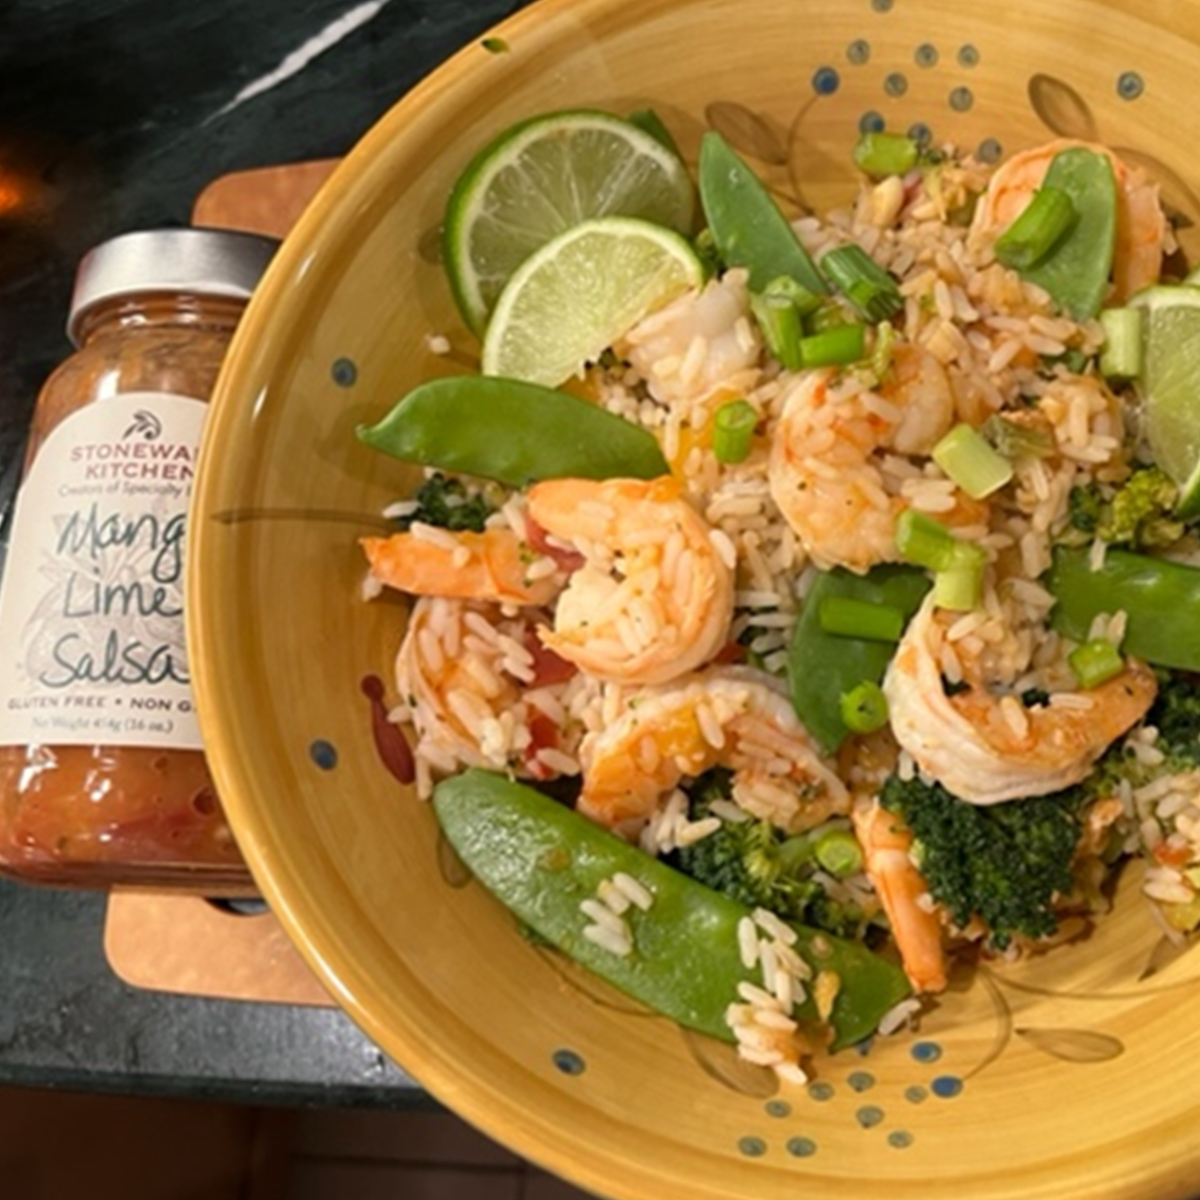 On a dark countertop, a large yellow bowl is filled with a garlicky shrimp dish, with rice, limes, and peas mixed throughout. To the left of the bowl is a jar of Mango Lime Salsa.